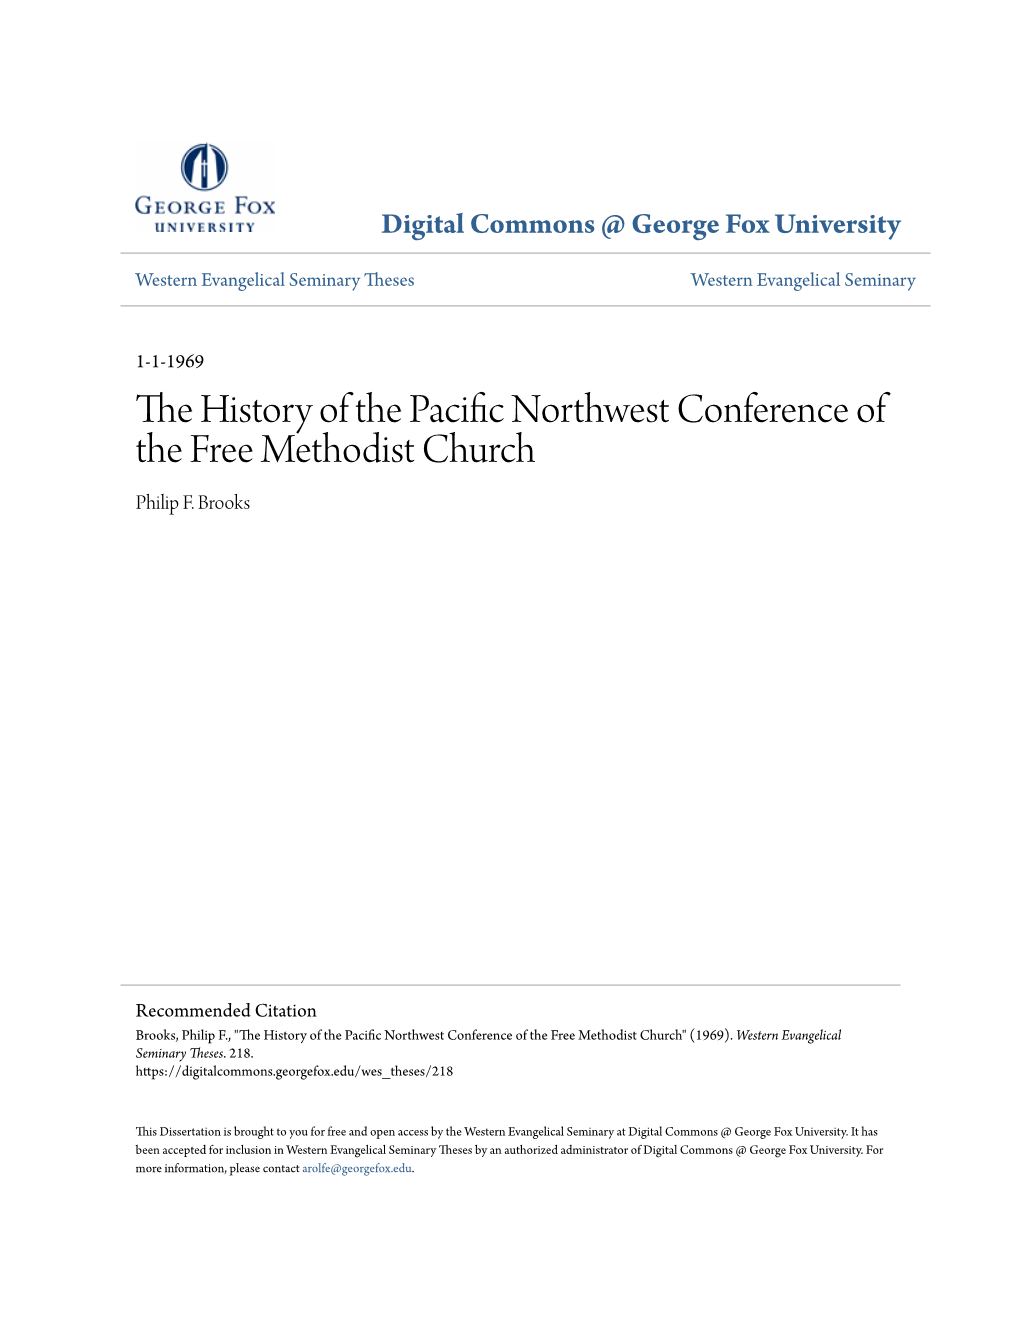 The History of the Pacific Northwest Conference of the Free Methodist